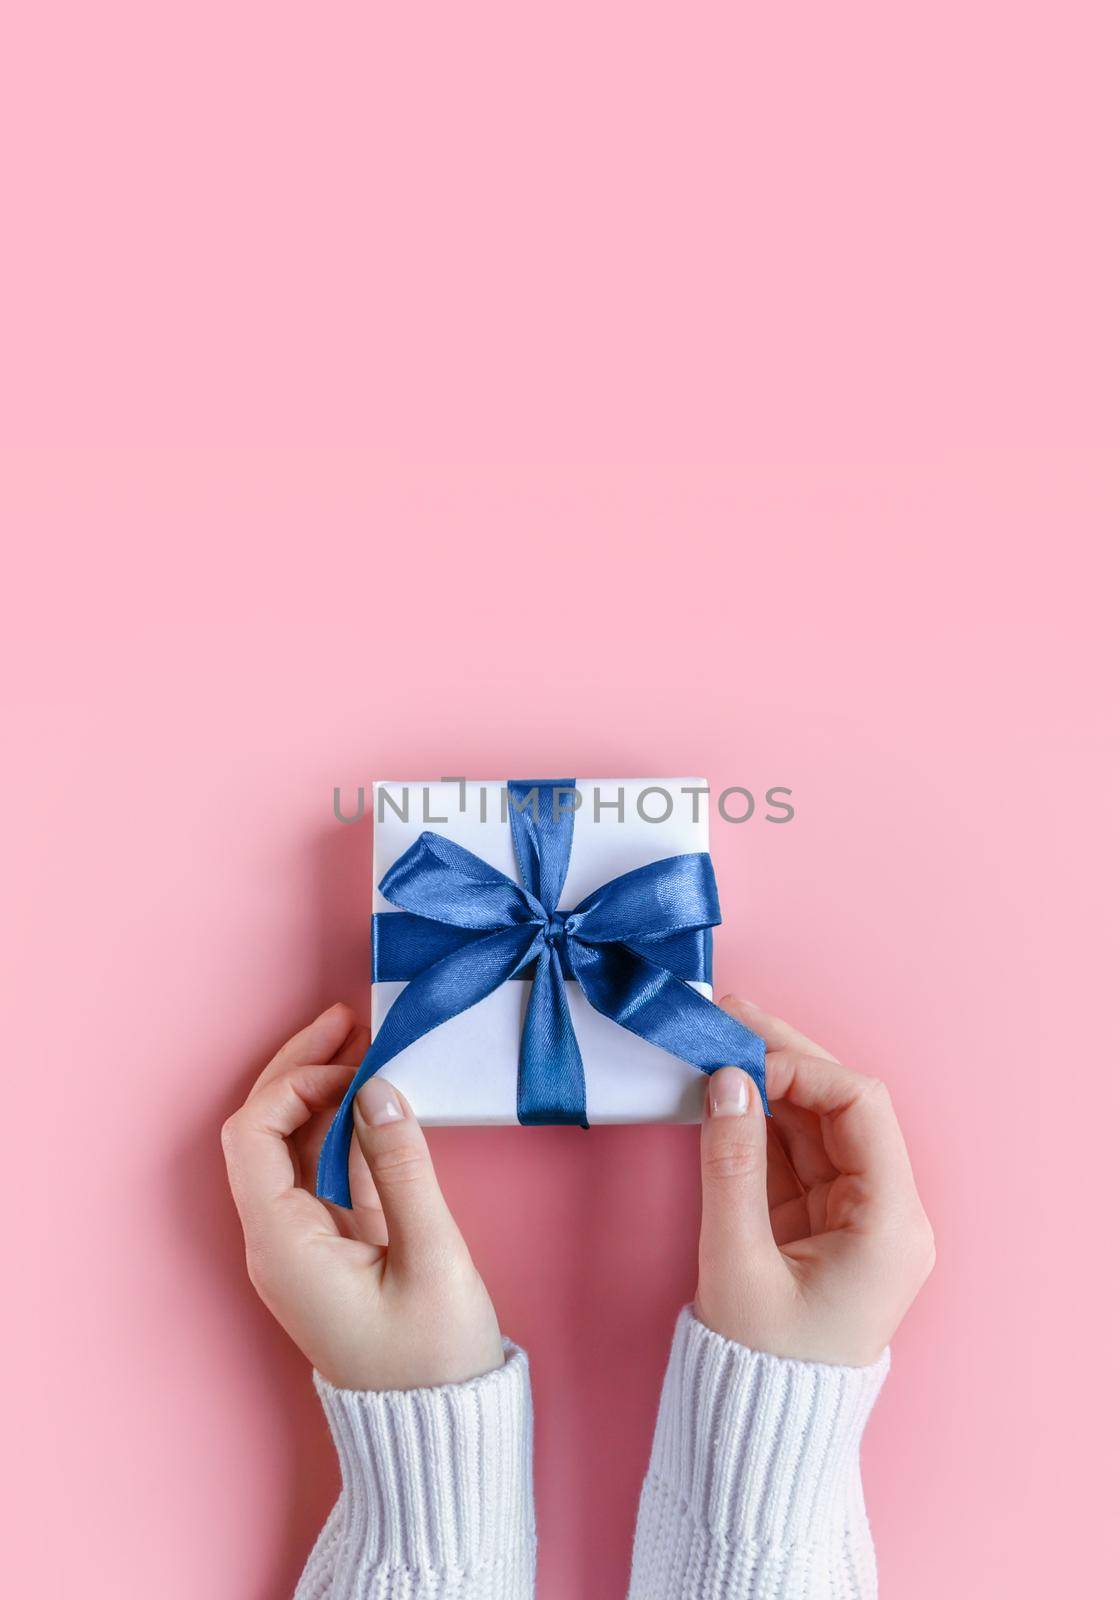 Female Hands in sweater holding gift in white wrapping paper on pink background. St. Valentines Day, love, tenderness, friendship, Birthday, Christmas, care concept. Cozy, festive, romantic wallpaper